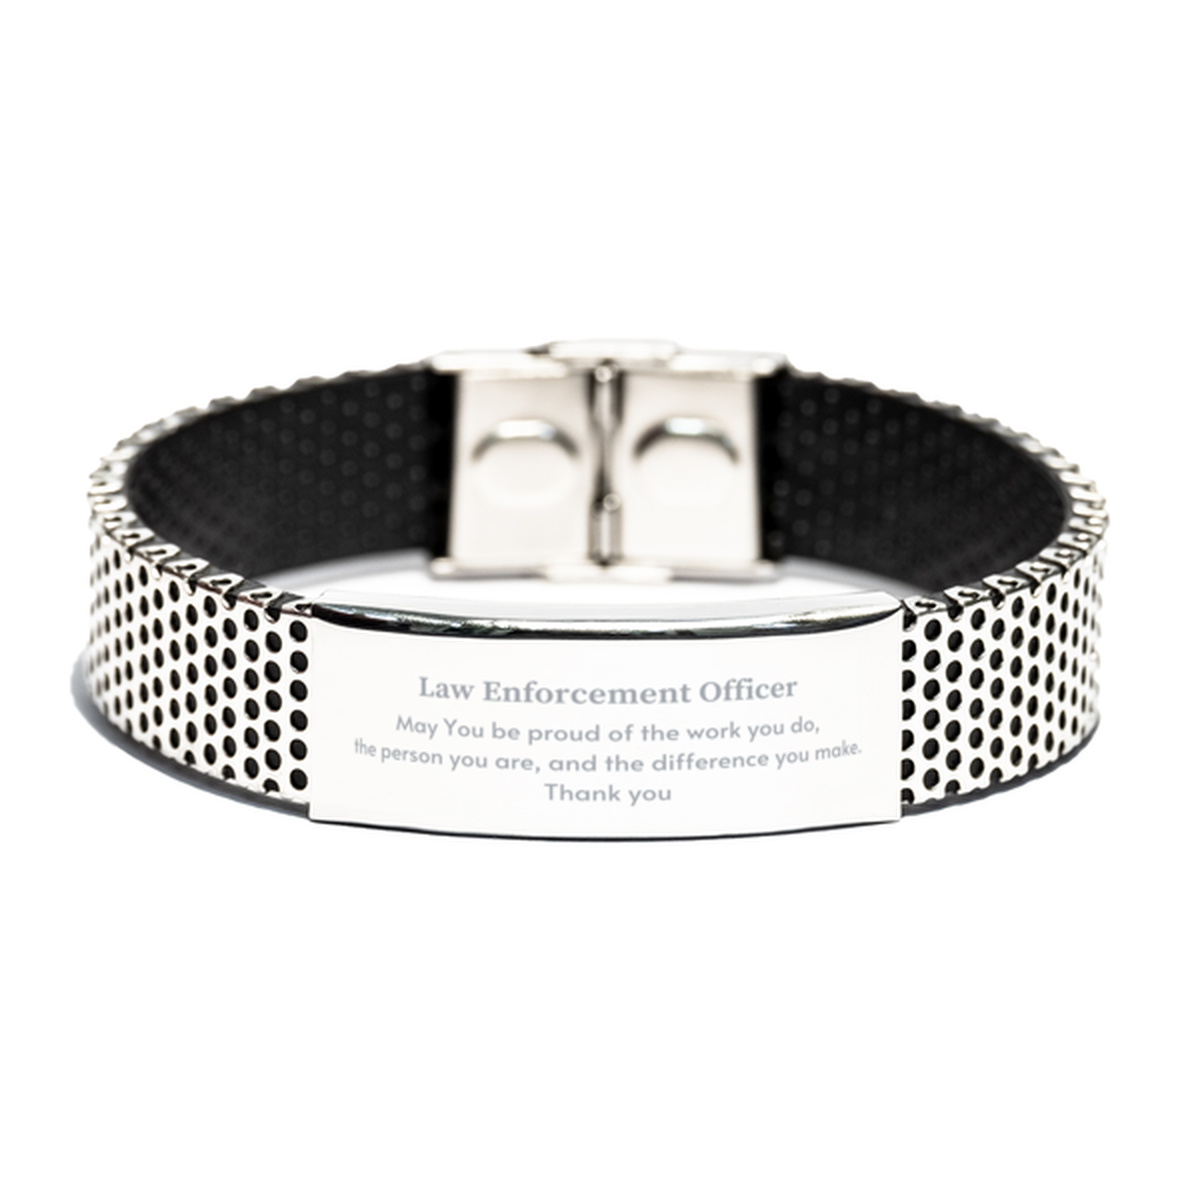 Heartwarming Stainless Steel Bracelet Retirement Coworkers Gifts for Law Enforcement Officer, Law Enforcement Officer May You be proud of the work you do, the person you are Gifts for Boss Men Women Friends